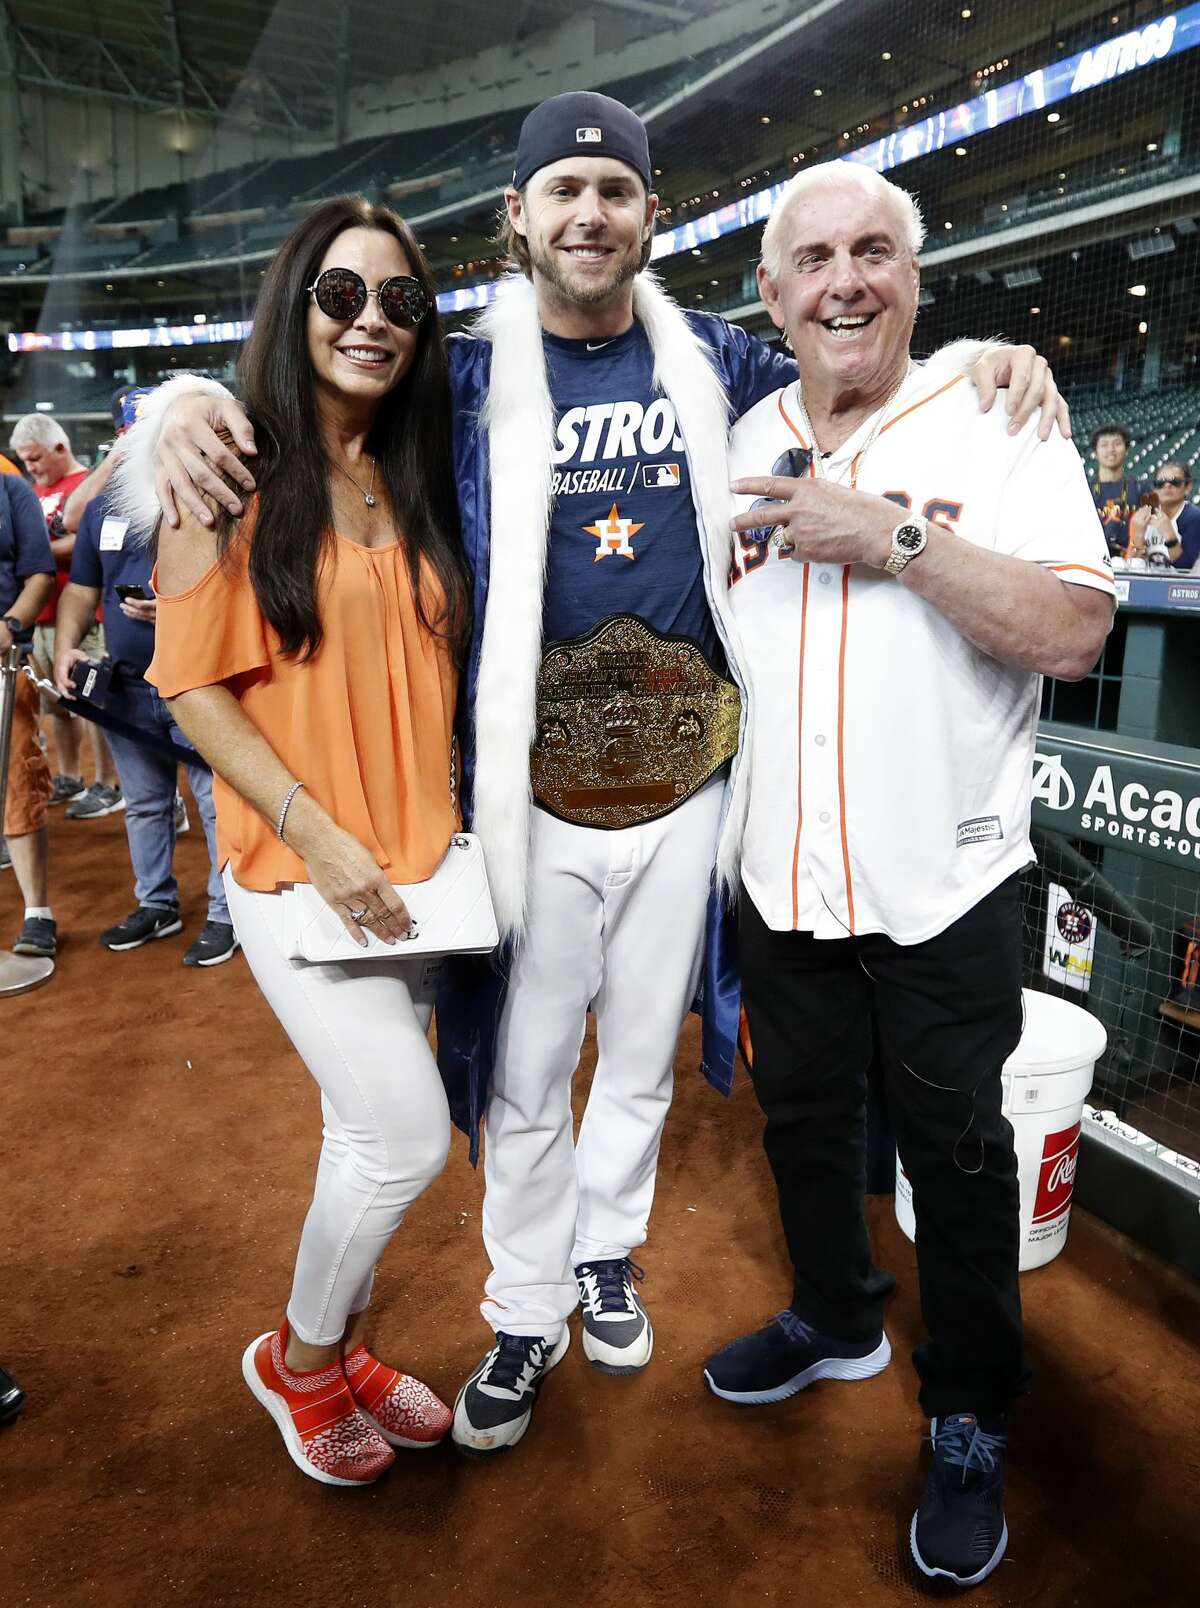 Ric Flair and his wife, Wendy Barlow poses with Houston Astros right fielder Josh Reddick, who came out of the clubhouse wearing his Ric Flair attire during batting practice before the start of an MLB game at Minute Maid Park, Wednesday, August 21, 2019.